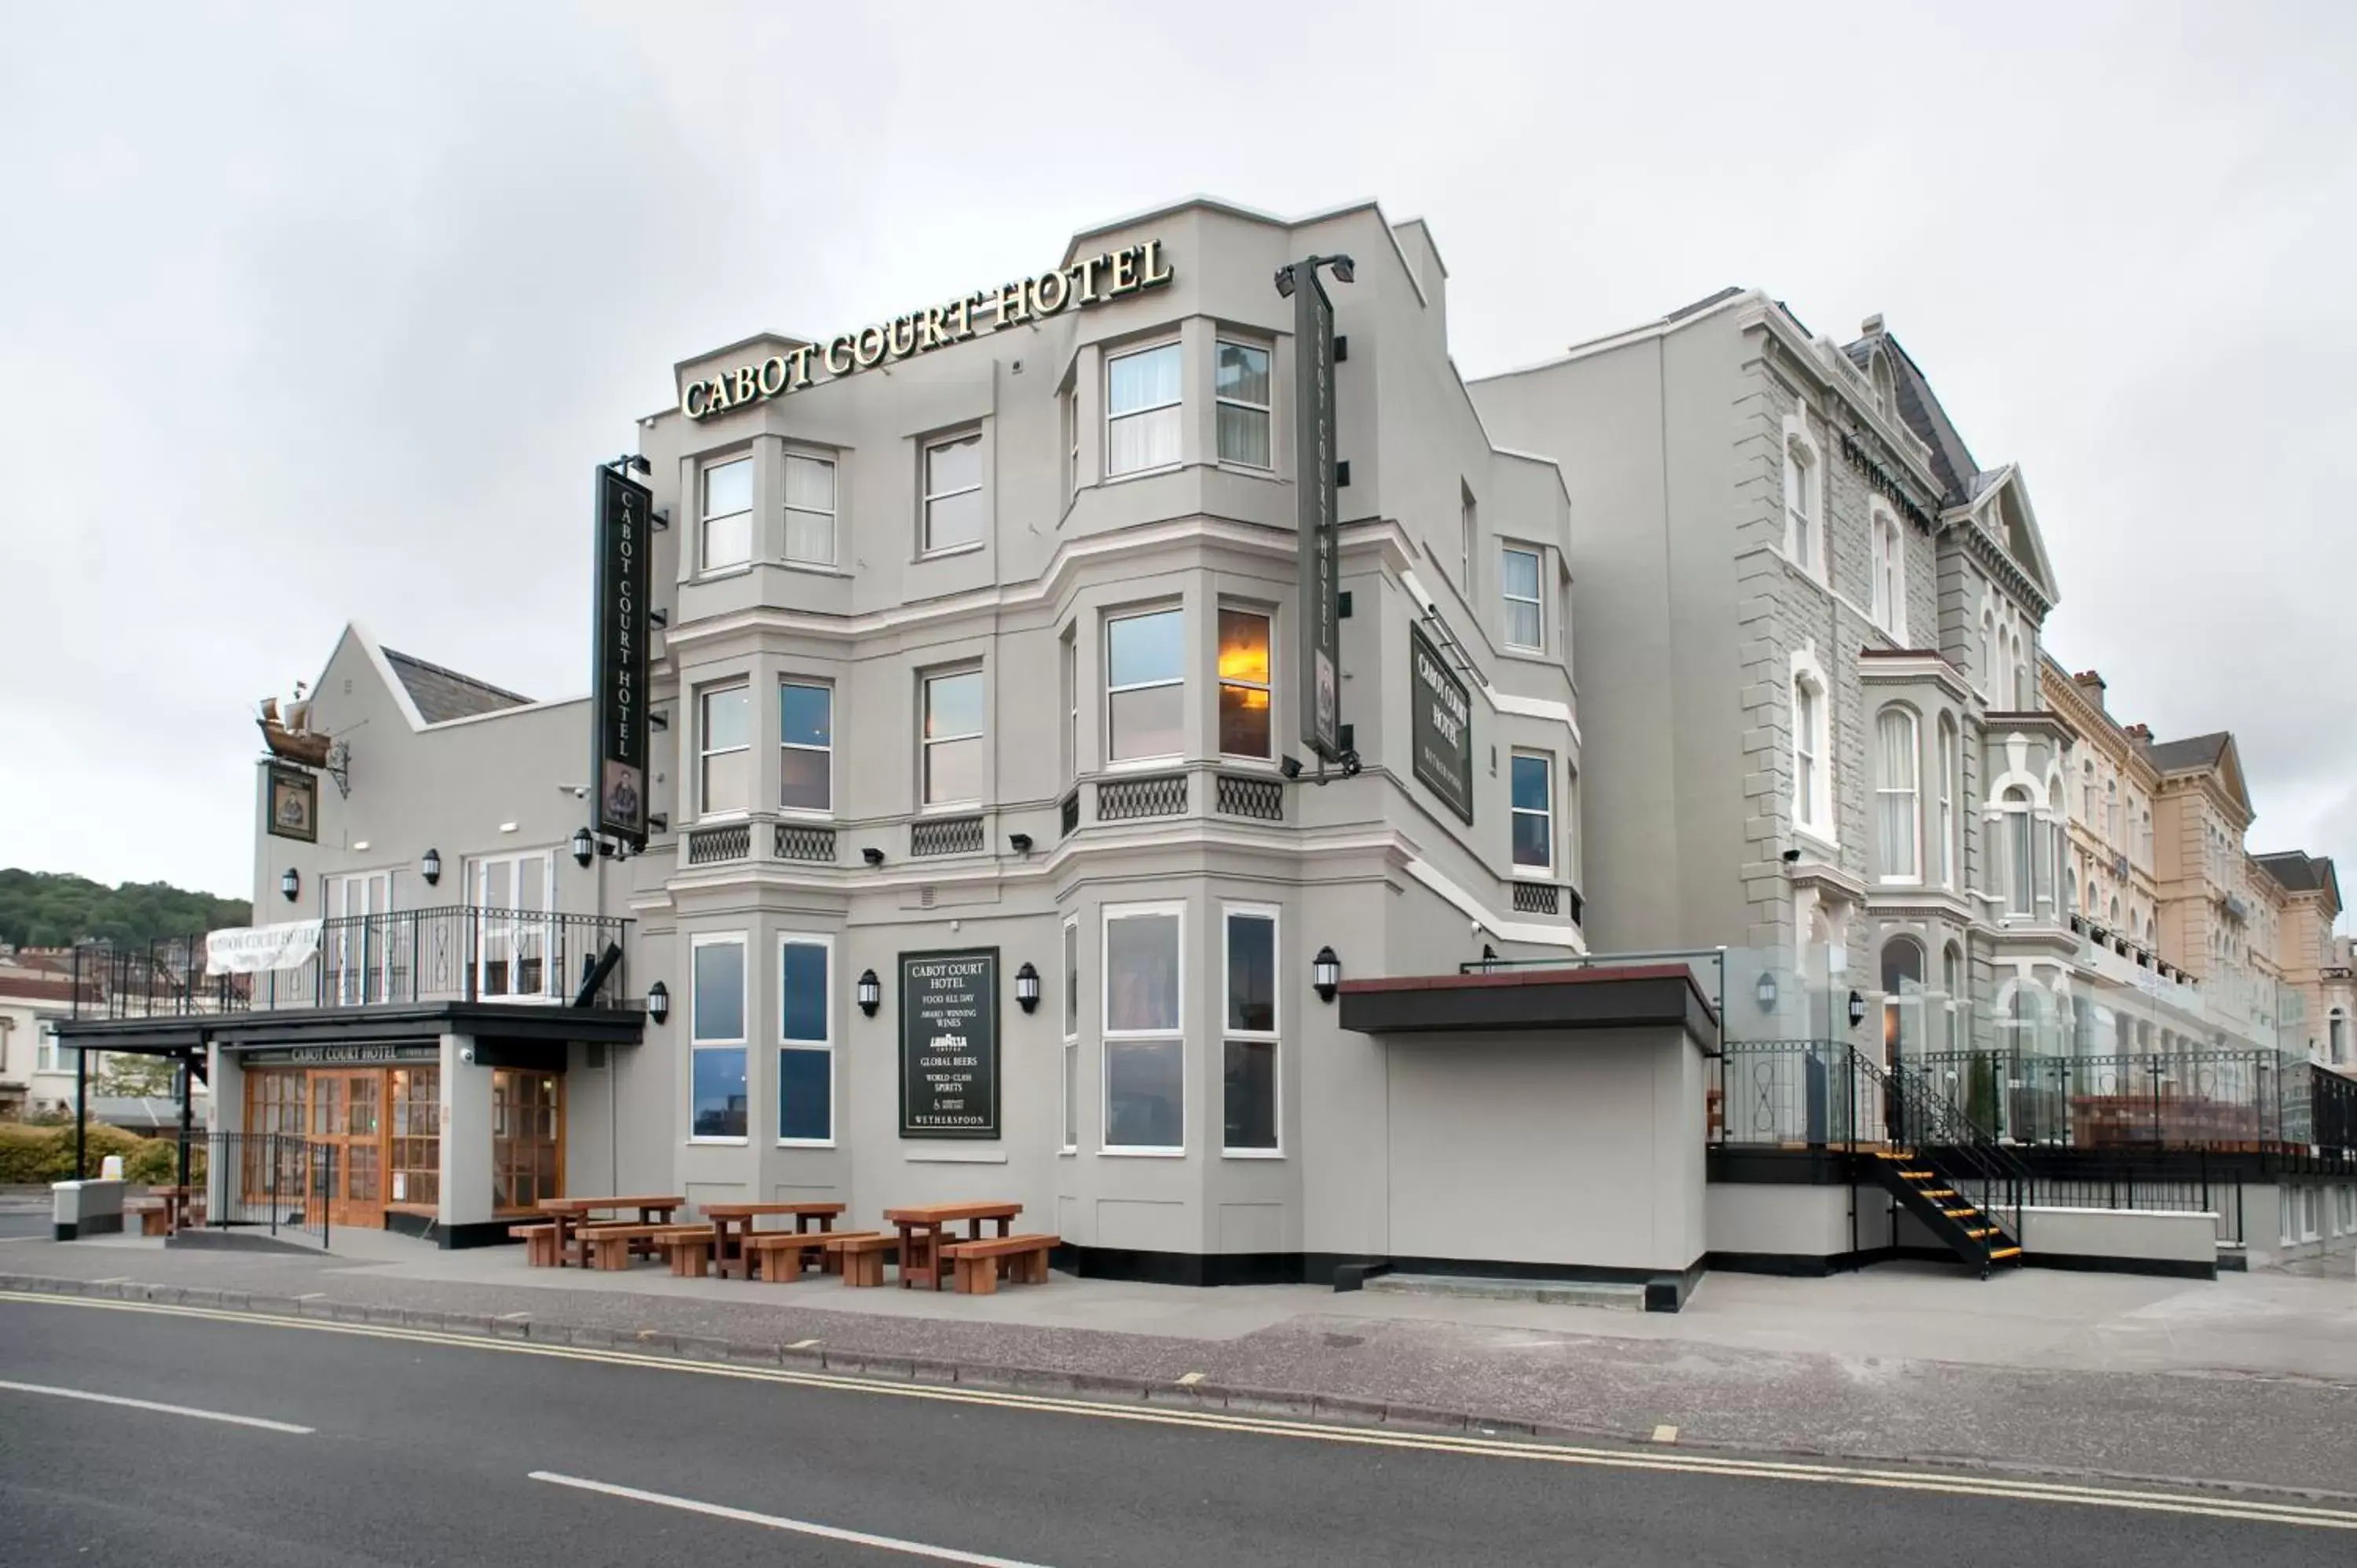 Property building in Cabot Court Hotel Wetherspoon